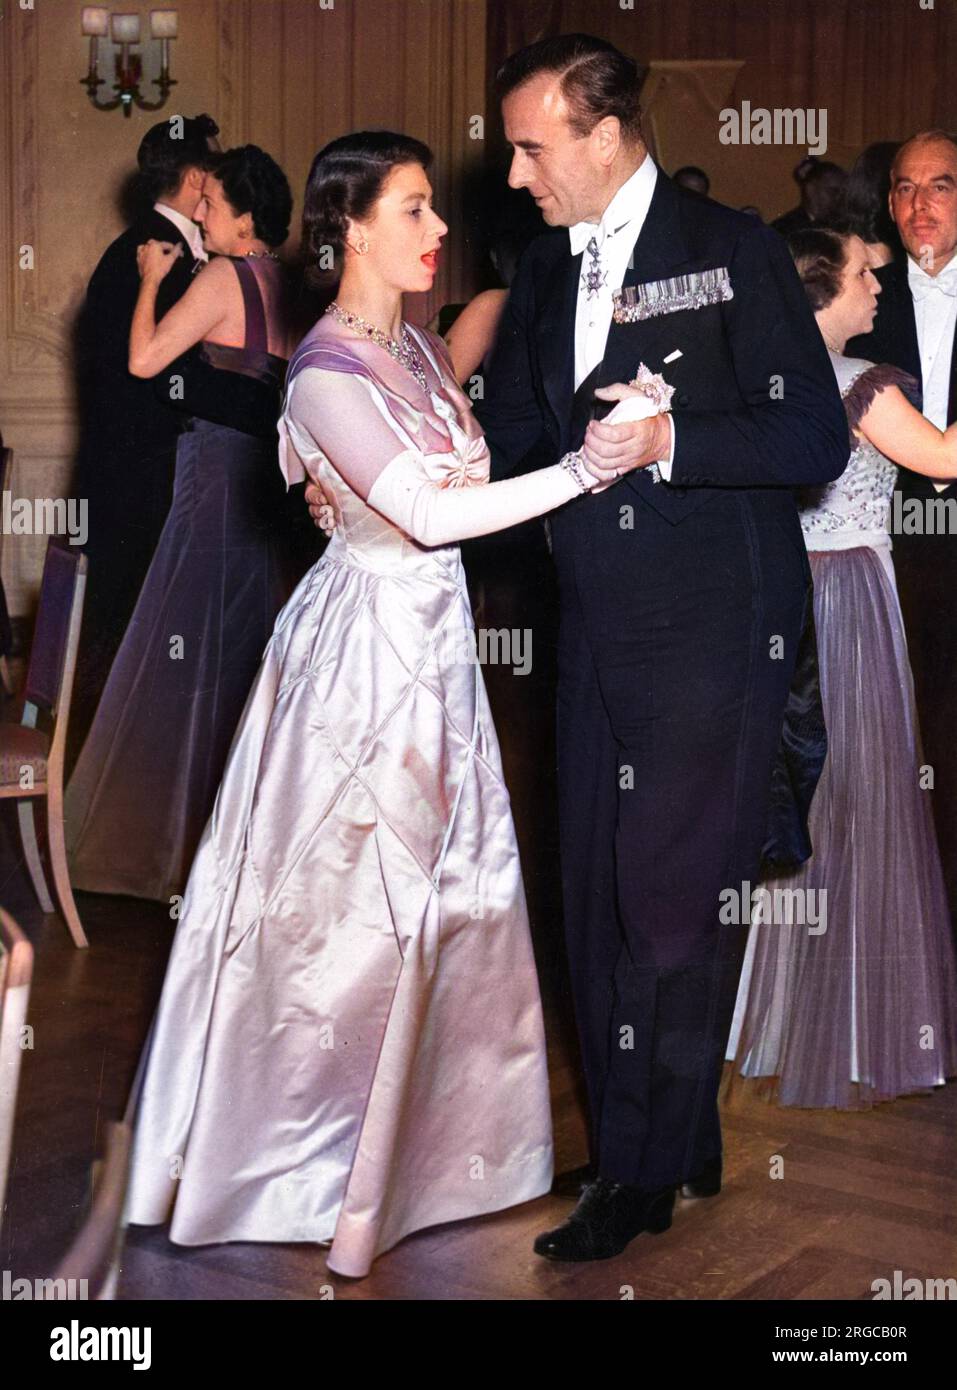 Princess Elizabeth (Queen Elizabeth II) dancing with Lord Louis Mountbatten at a ball held at the Savoy in aid of the Educational Fund Appeal of the Royal College of Nursing. Stock Photo